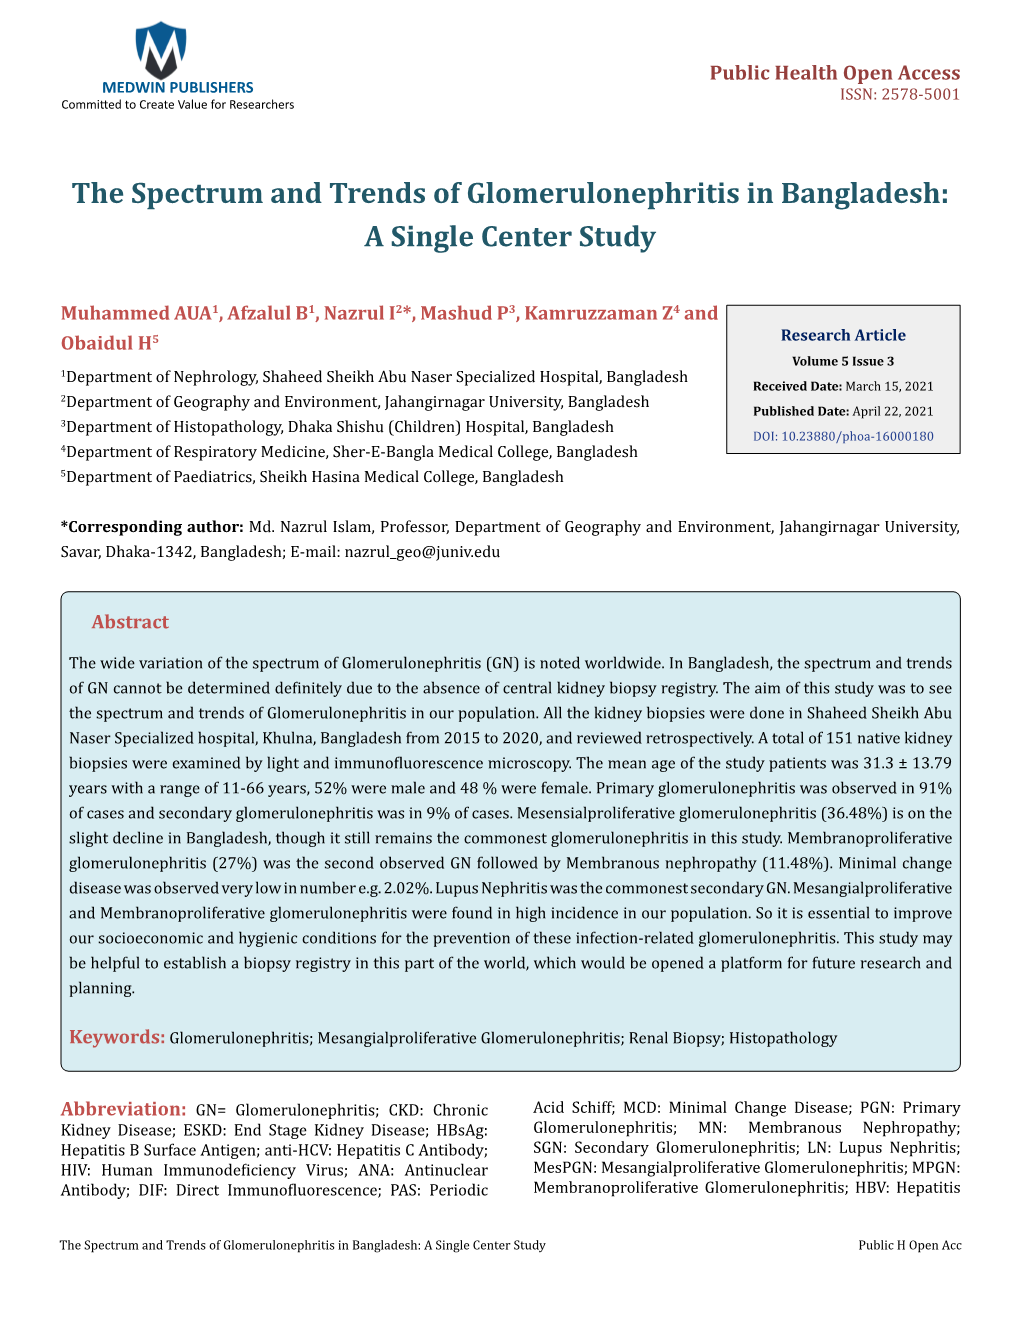 The Spectrum and Trends of Glomerulonephritis in Bangladesh: a Single Center Study